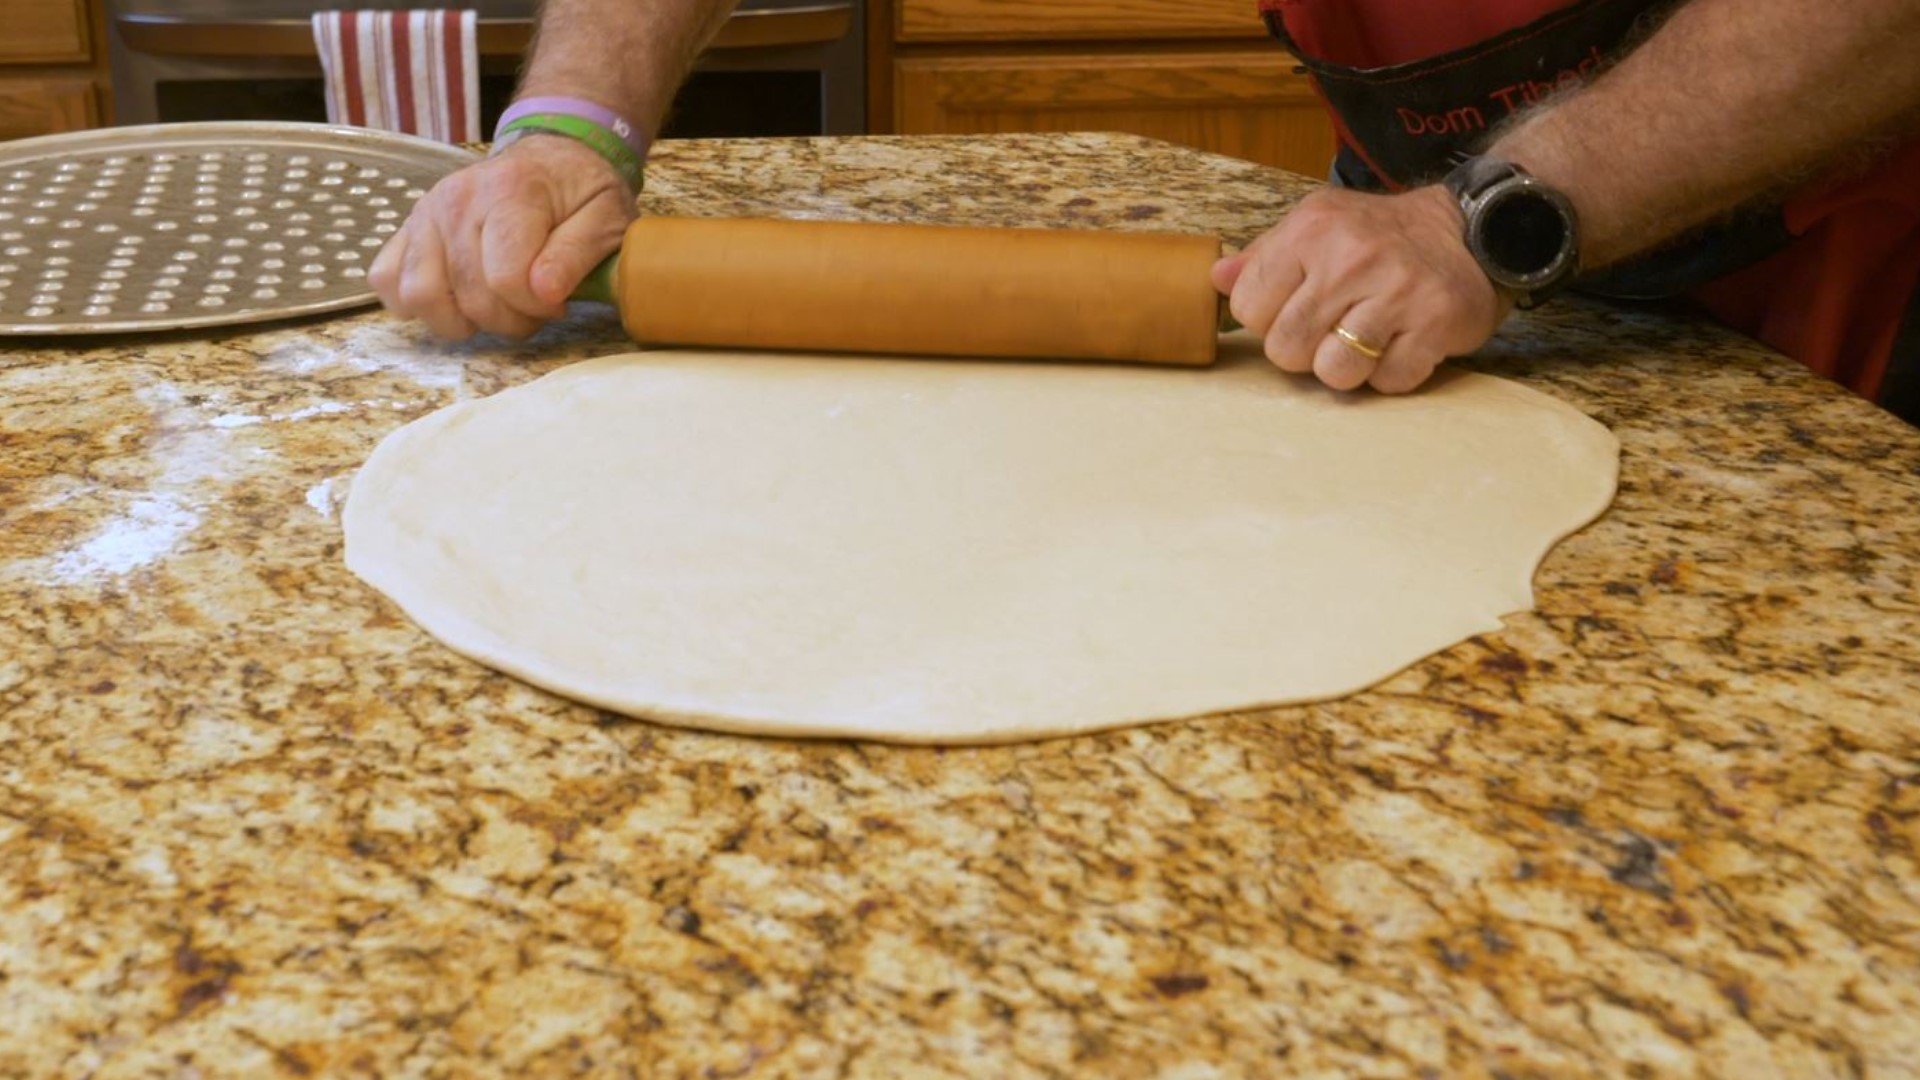 Looking to step up your homemade pizza game? Start with Dom Tiberi's pizza dough.